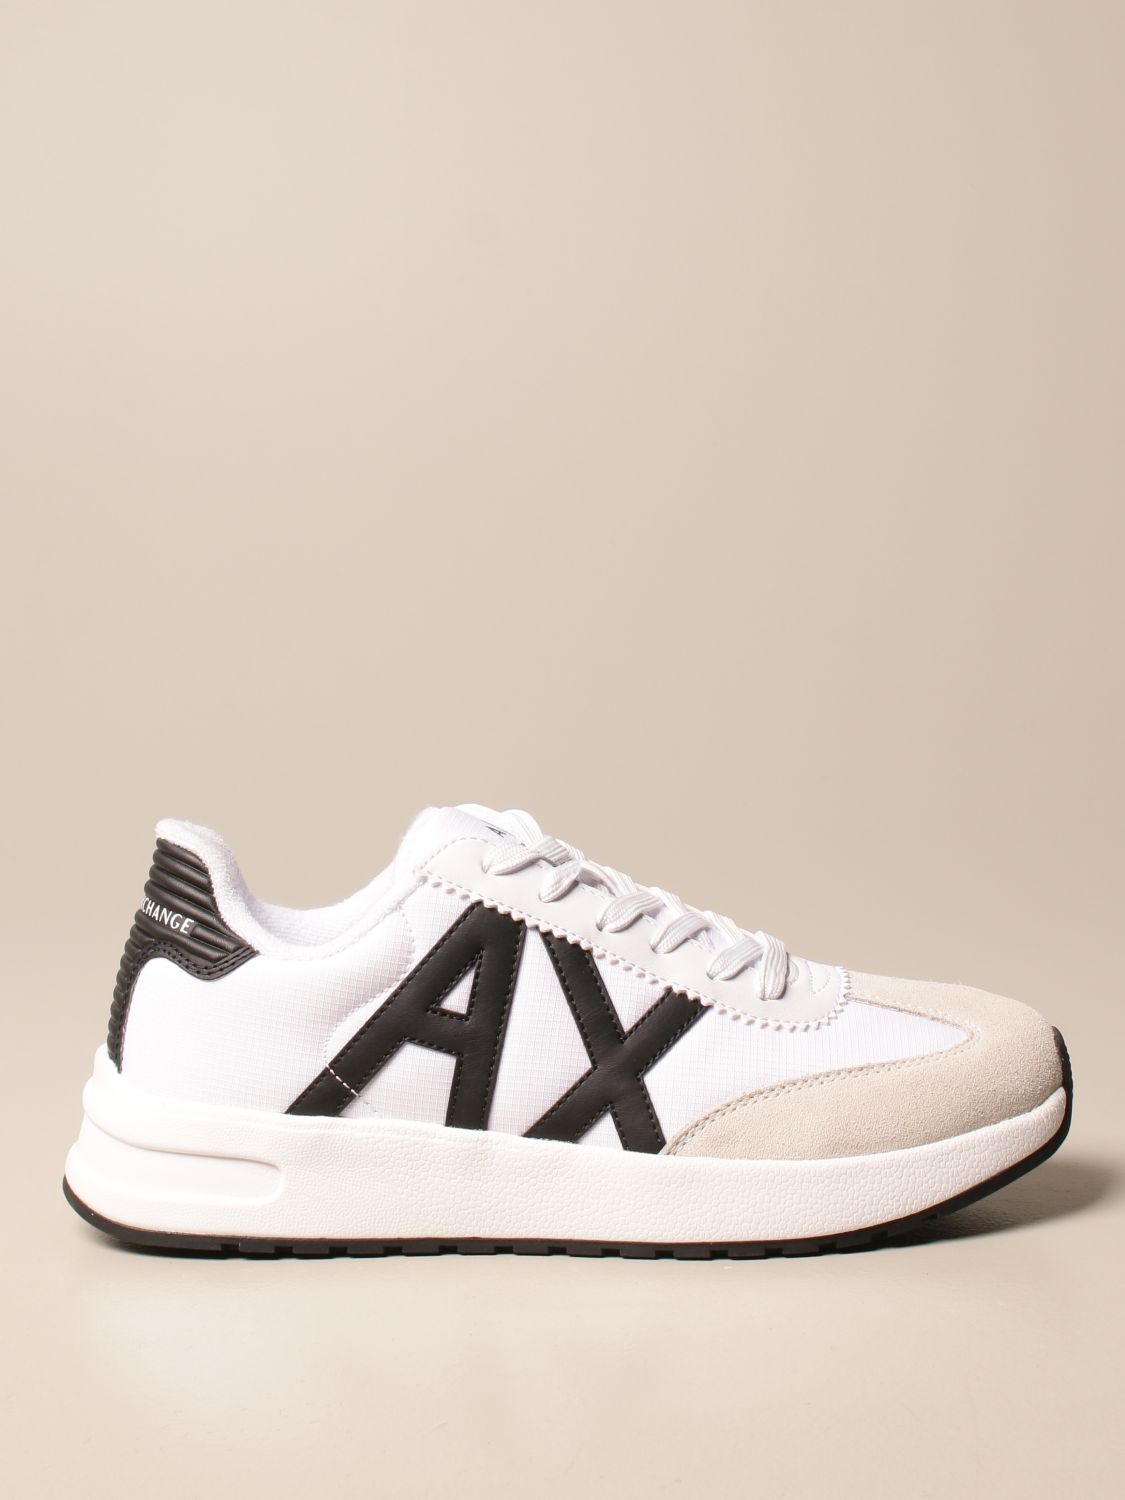 Mens Armani Exchange Trainers Outlet, SAVE 52%.